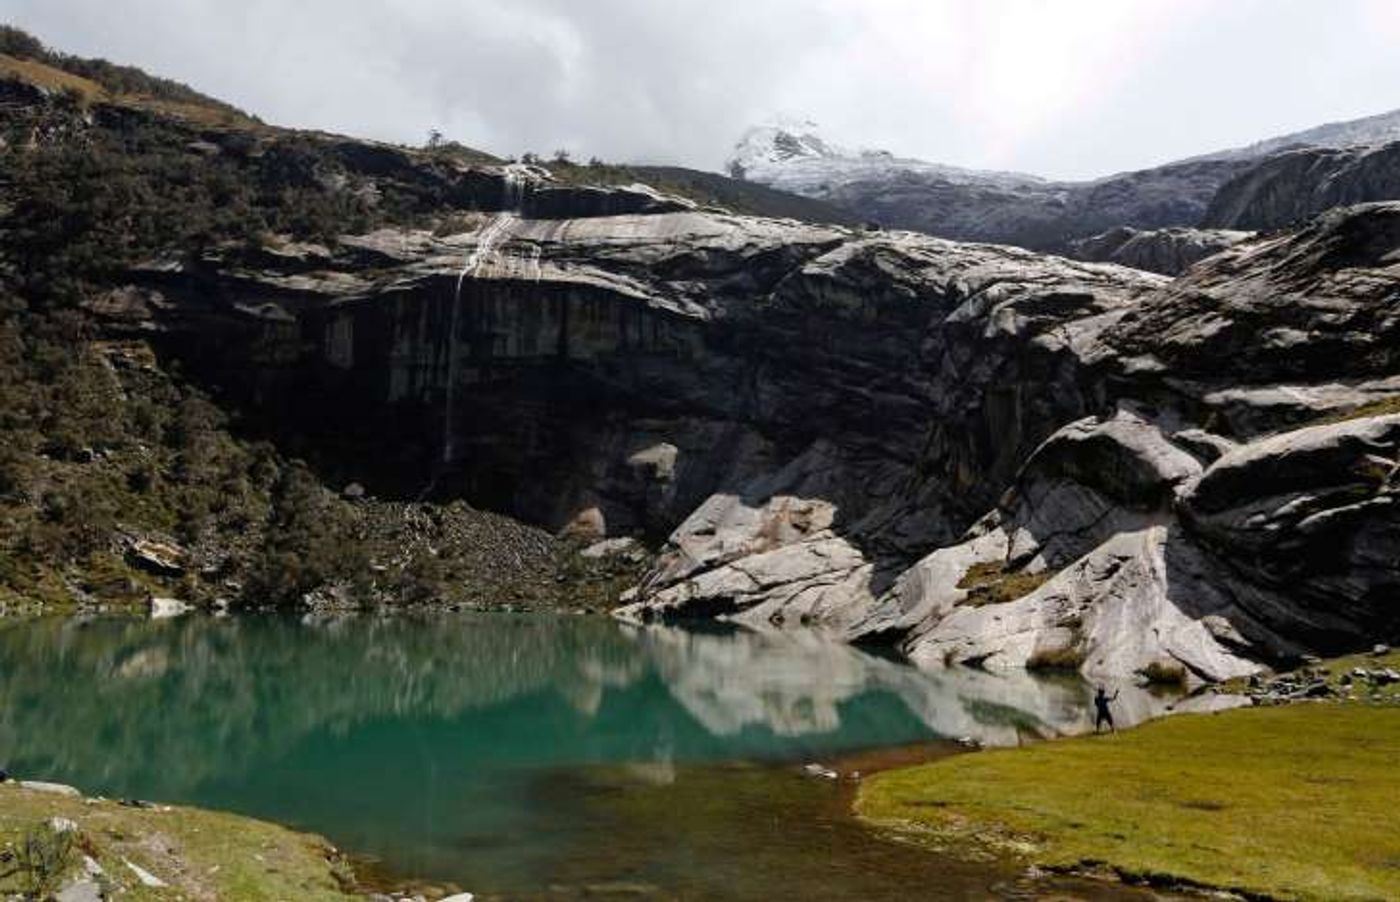 Lake Rajupaquinan at Huascaran natural reserve in Ancash. Peru has more tropical glaciers than any other nation but rising temperatures linked to global warming have helped shrink the ice masses by up to 40 percent.